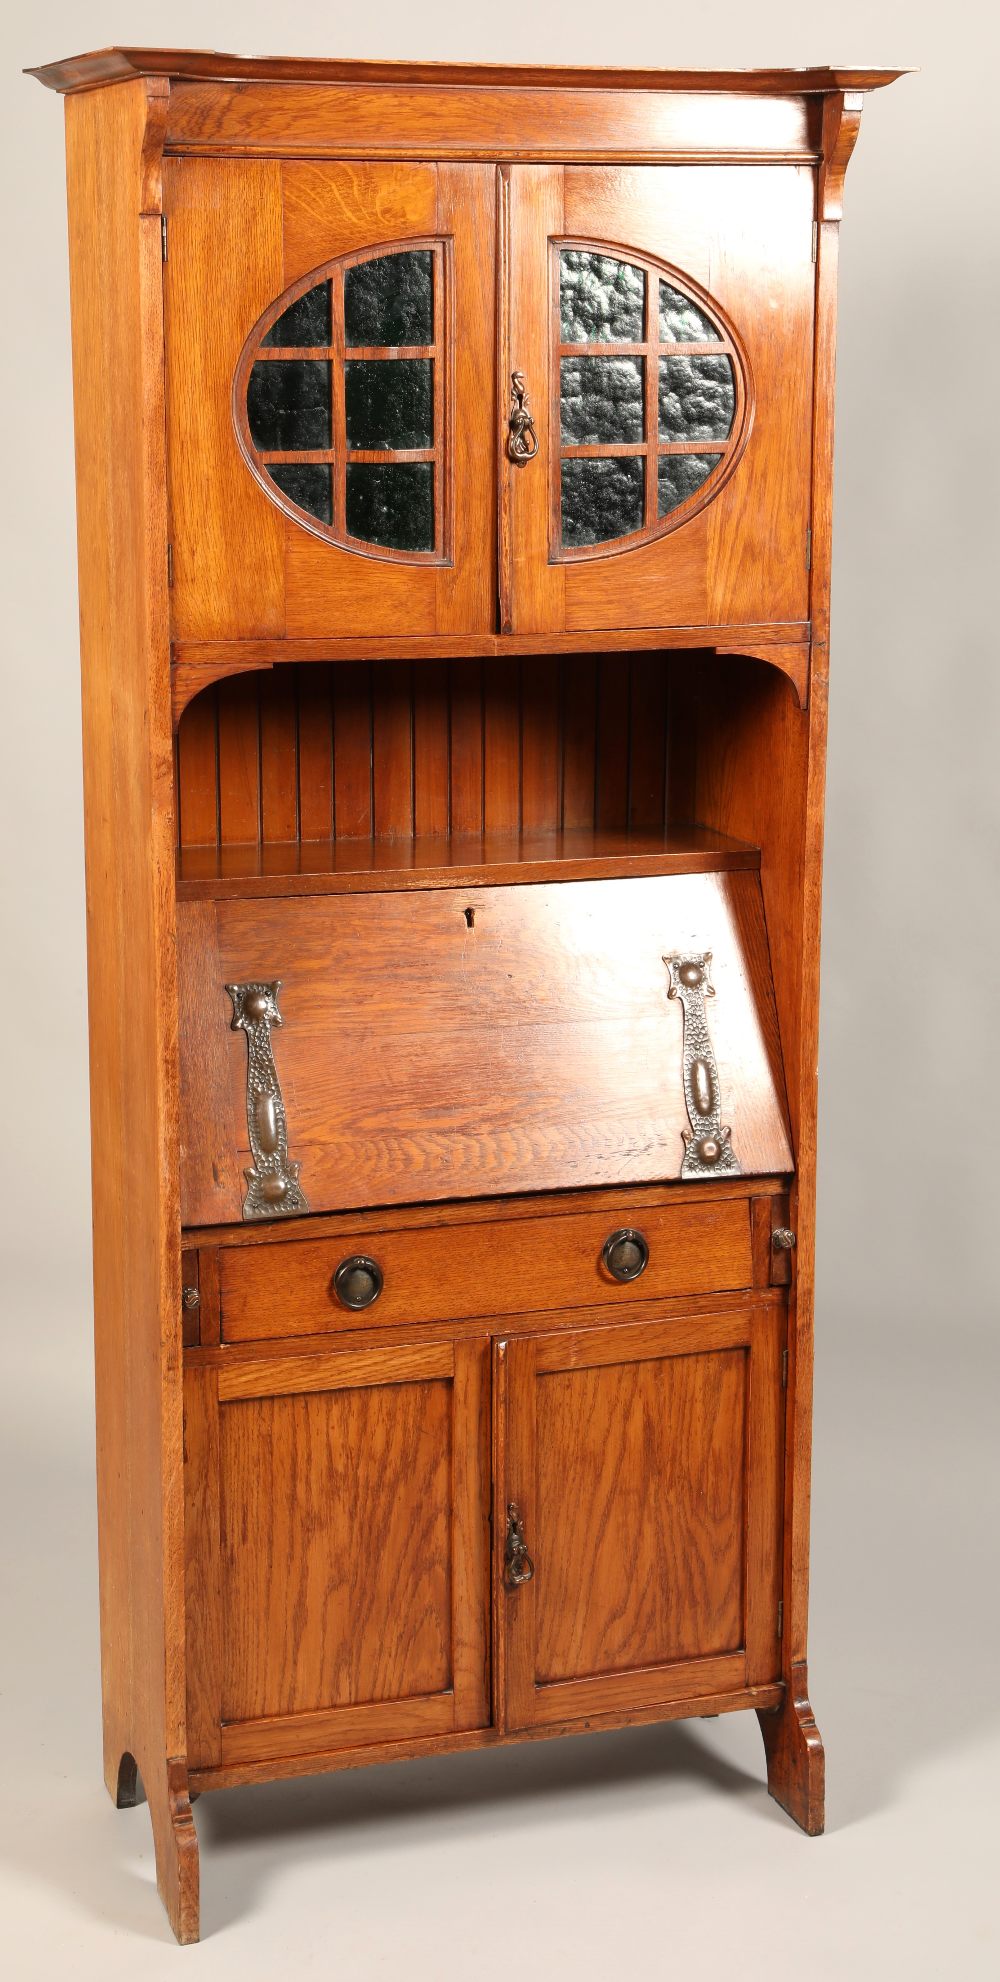 Arts and crafts oak bureau bookcase, with copped stylized mounts, green glazed top cupboard, 179 x